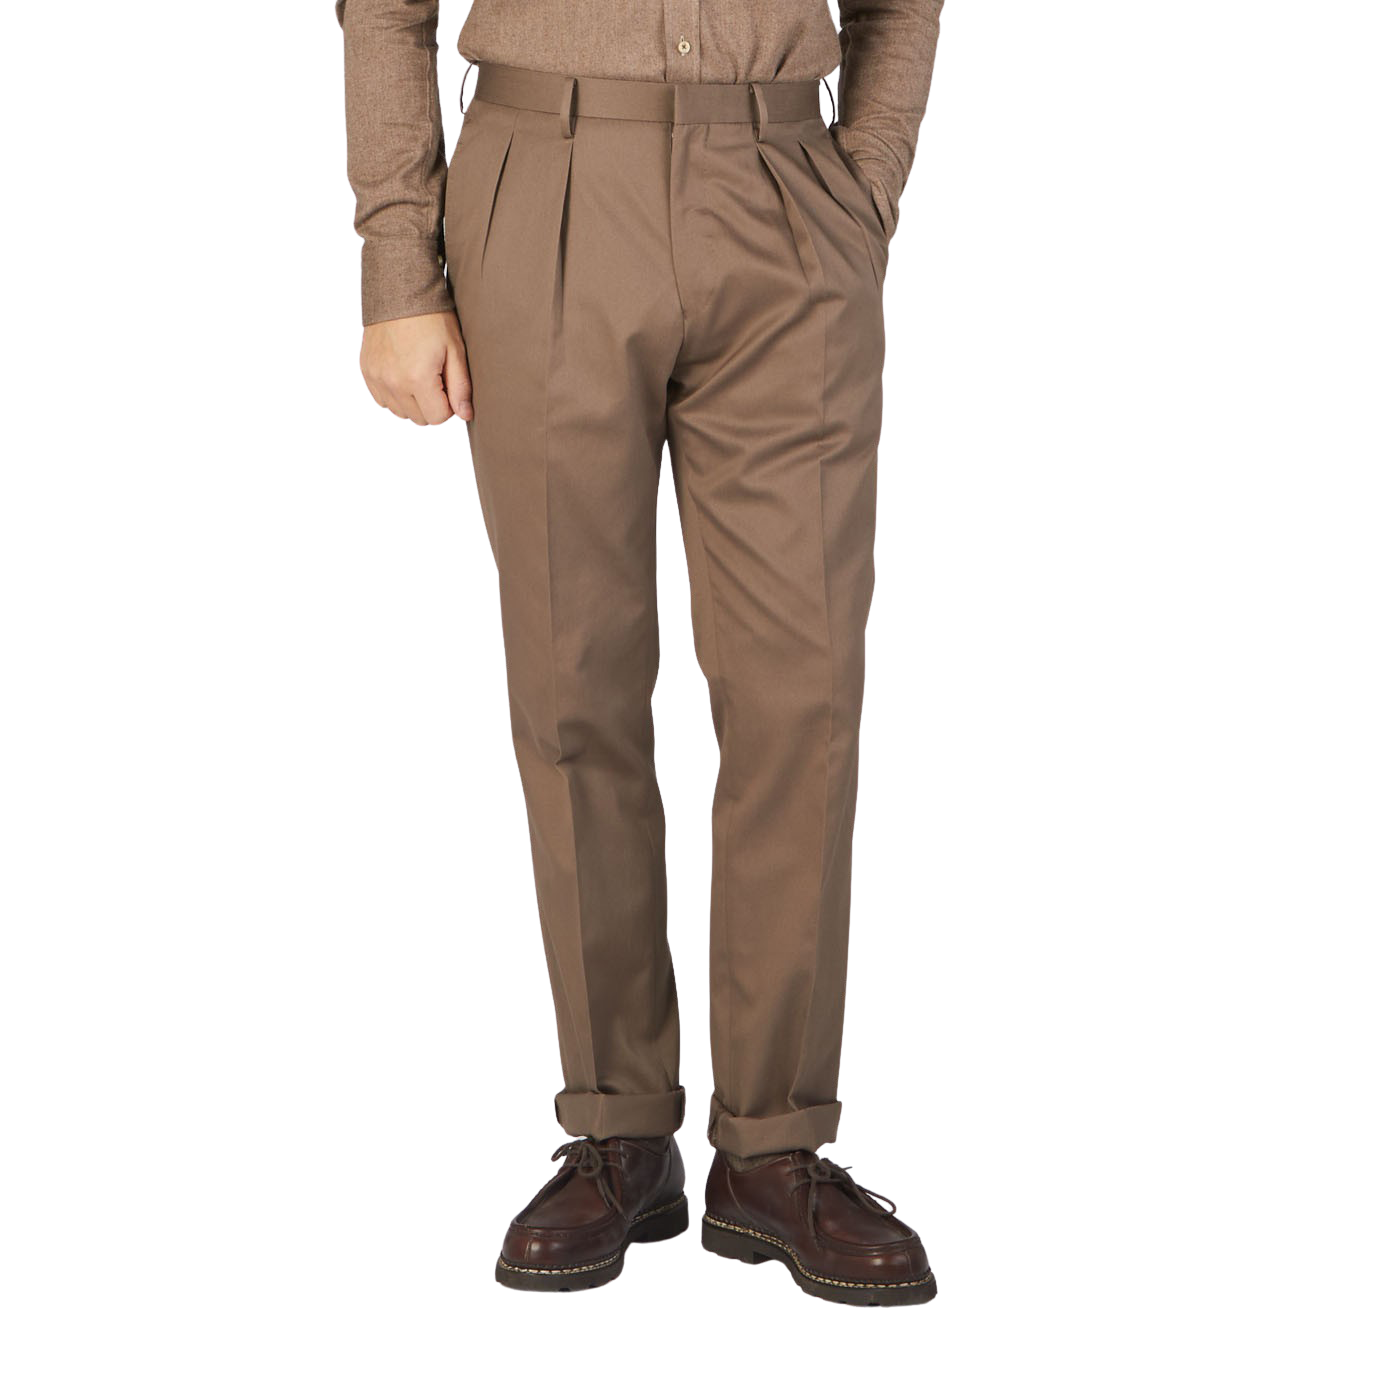 Ring Jacket | Muted Brown Cotton Twill Pleated Trousers